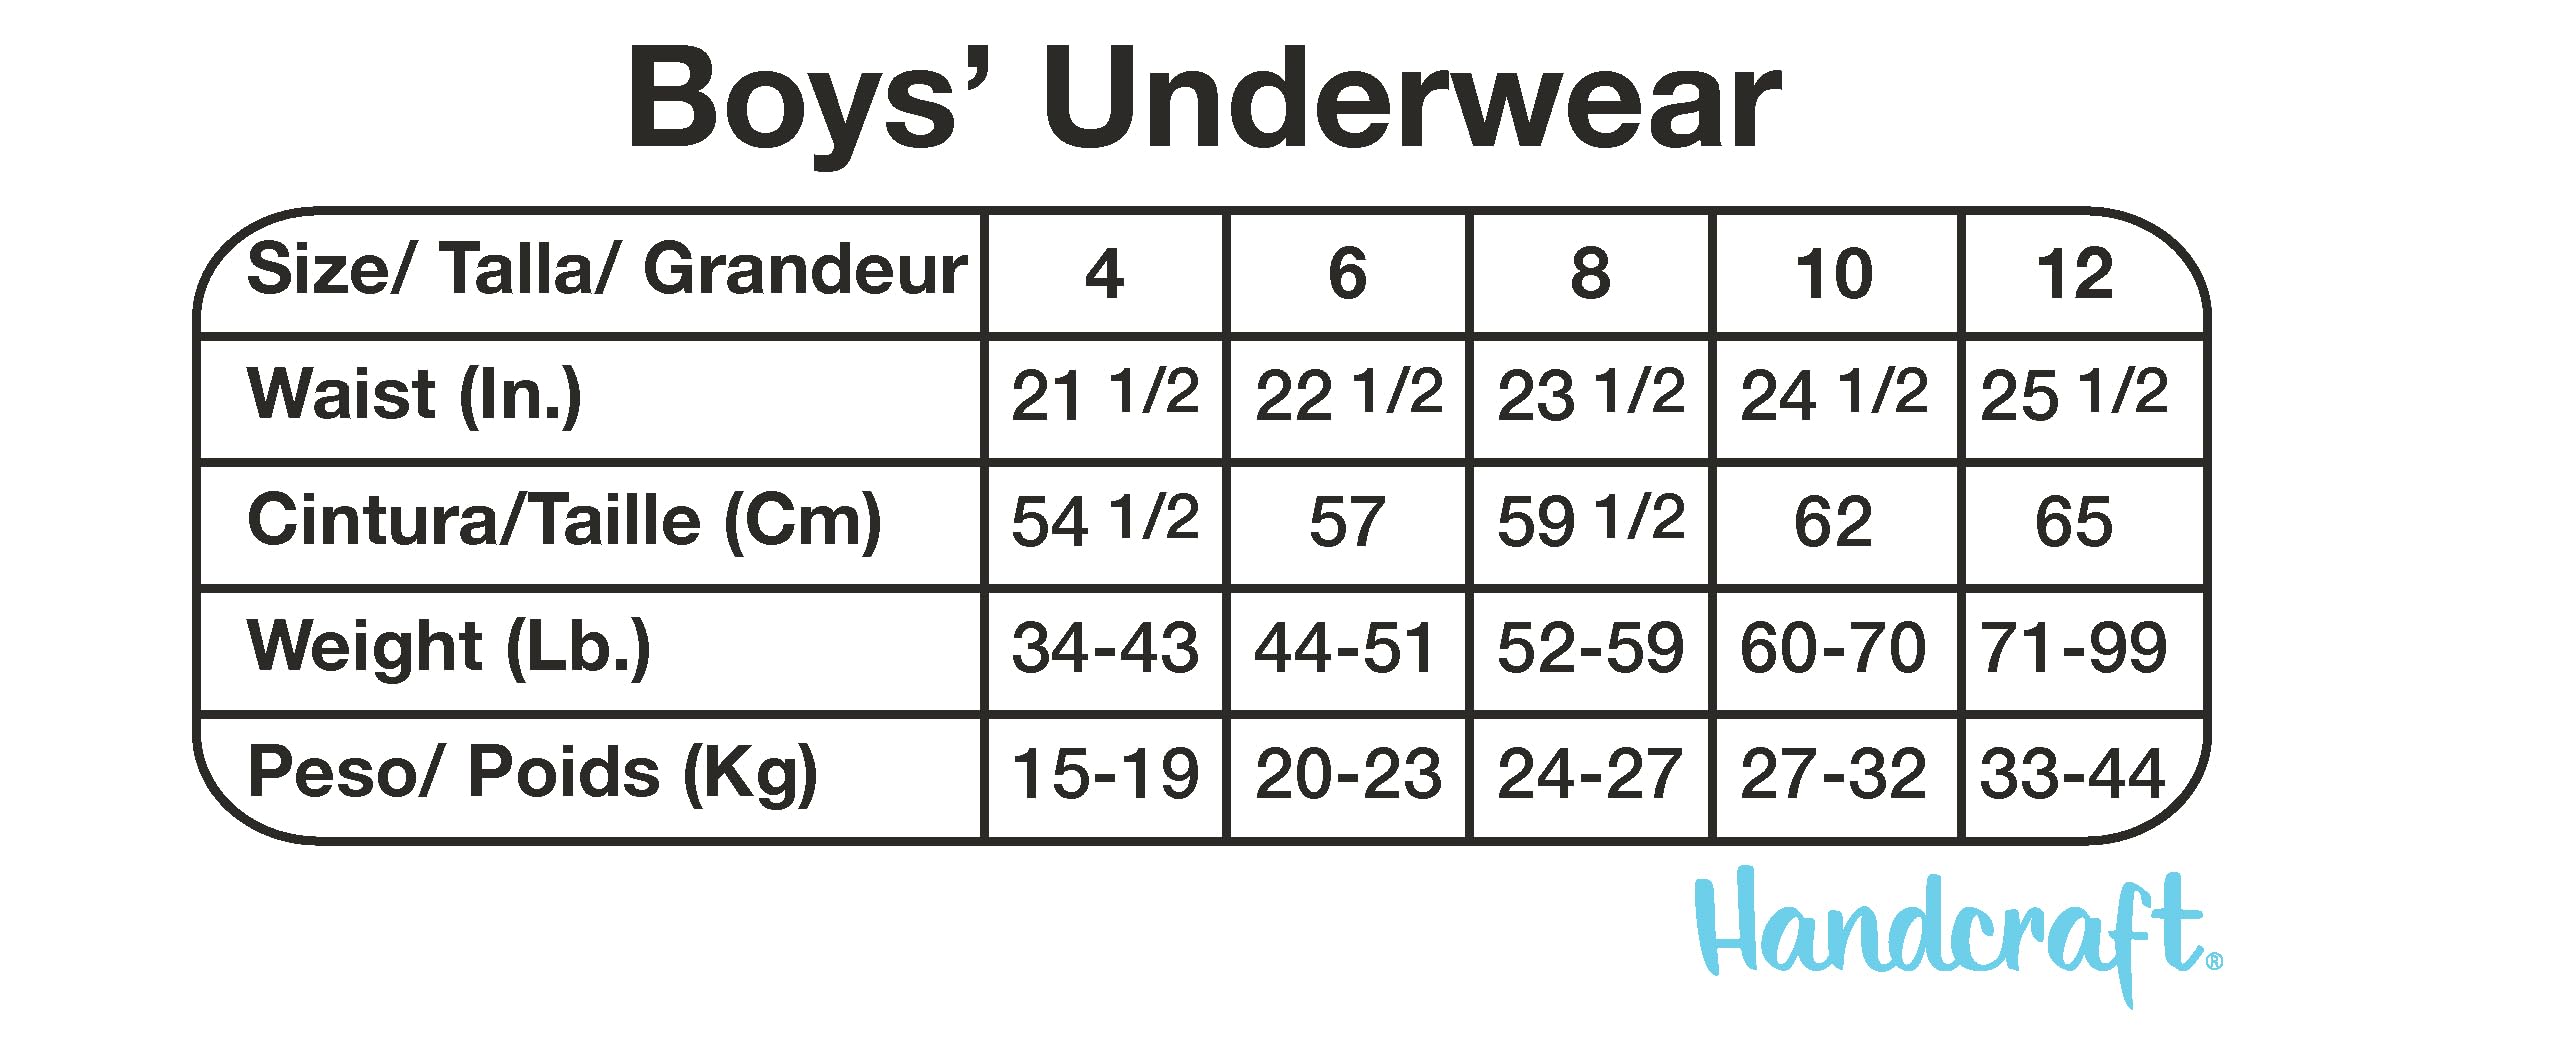 Hot Wheels Boys' Underwear Multipacks Available in Sizes 2/3t, 4t, 4, 6, 8 and 10